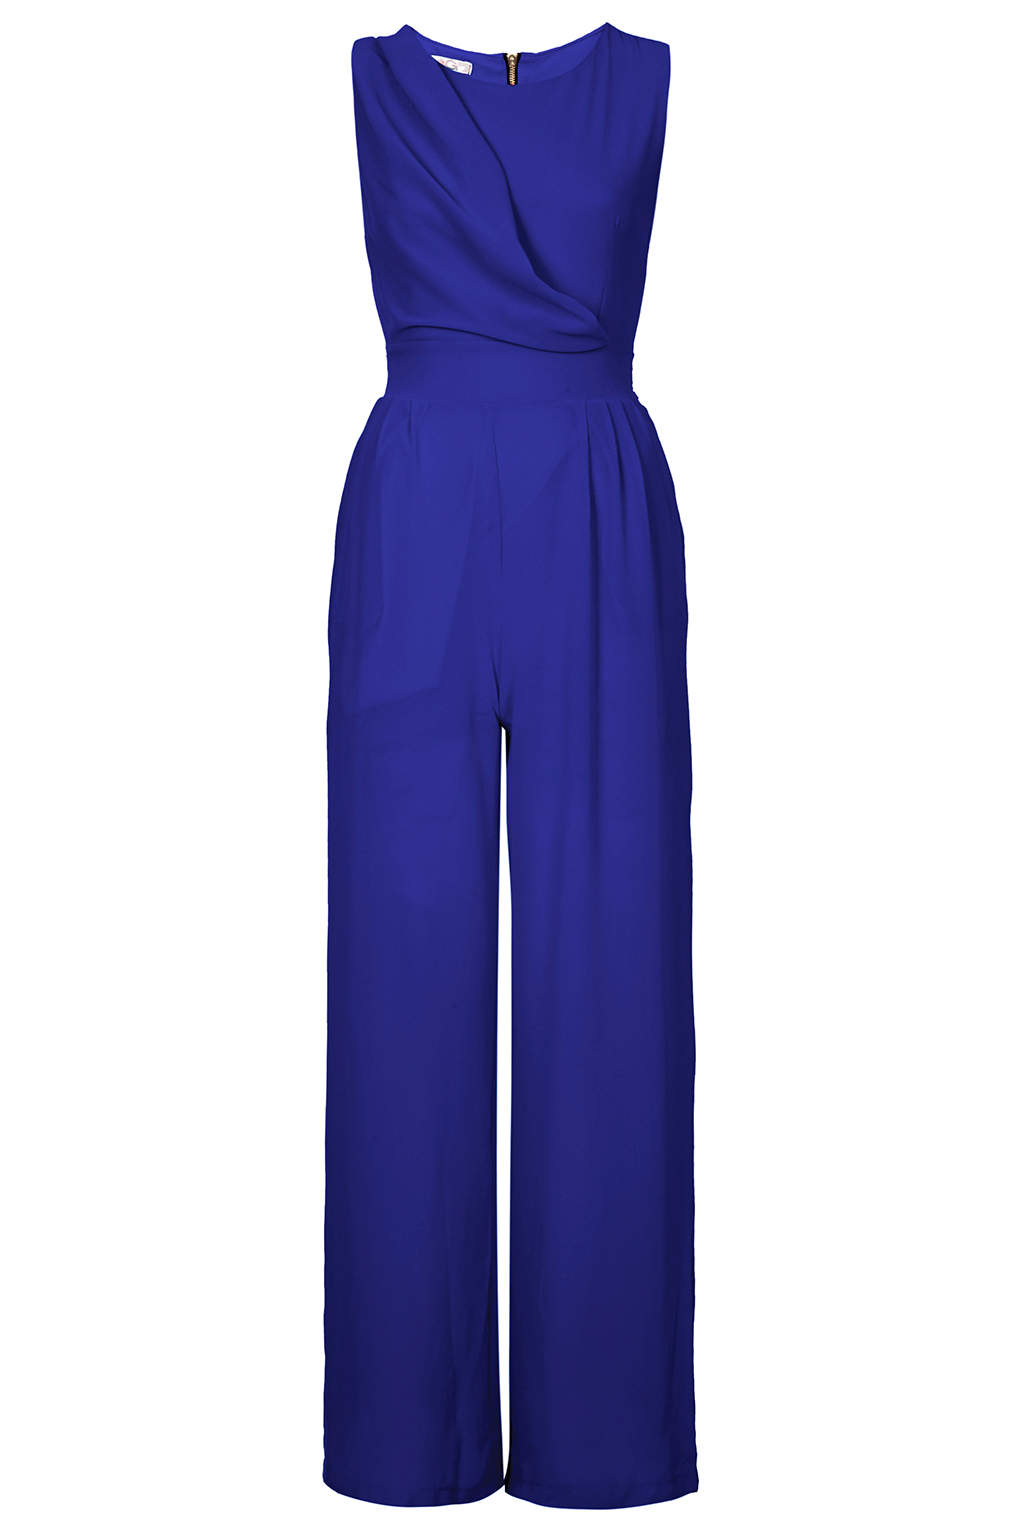 Topshop Wide Leg Jumpsuit By Wal G in Blue | Lyst